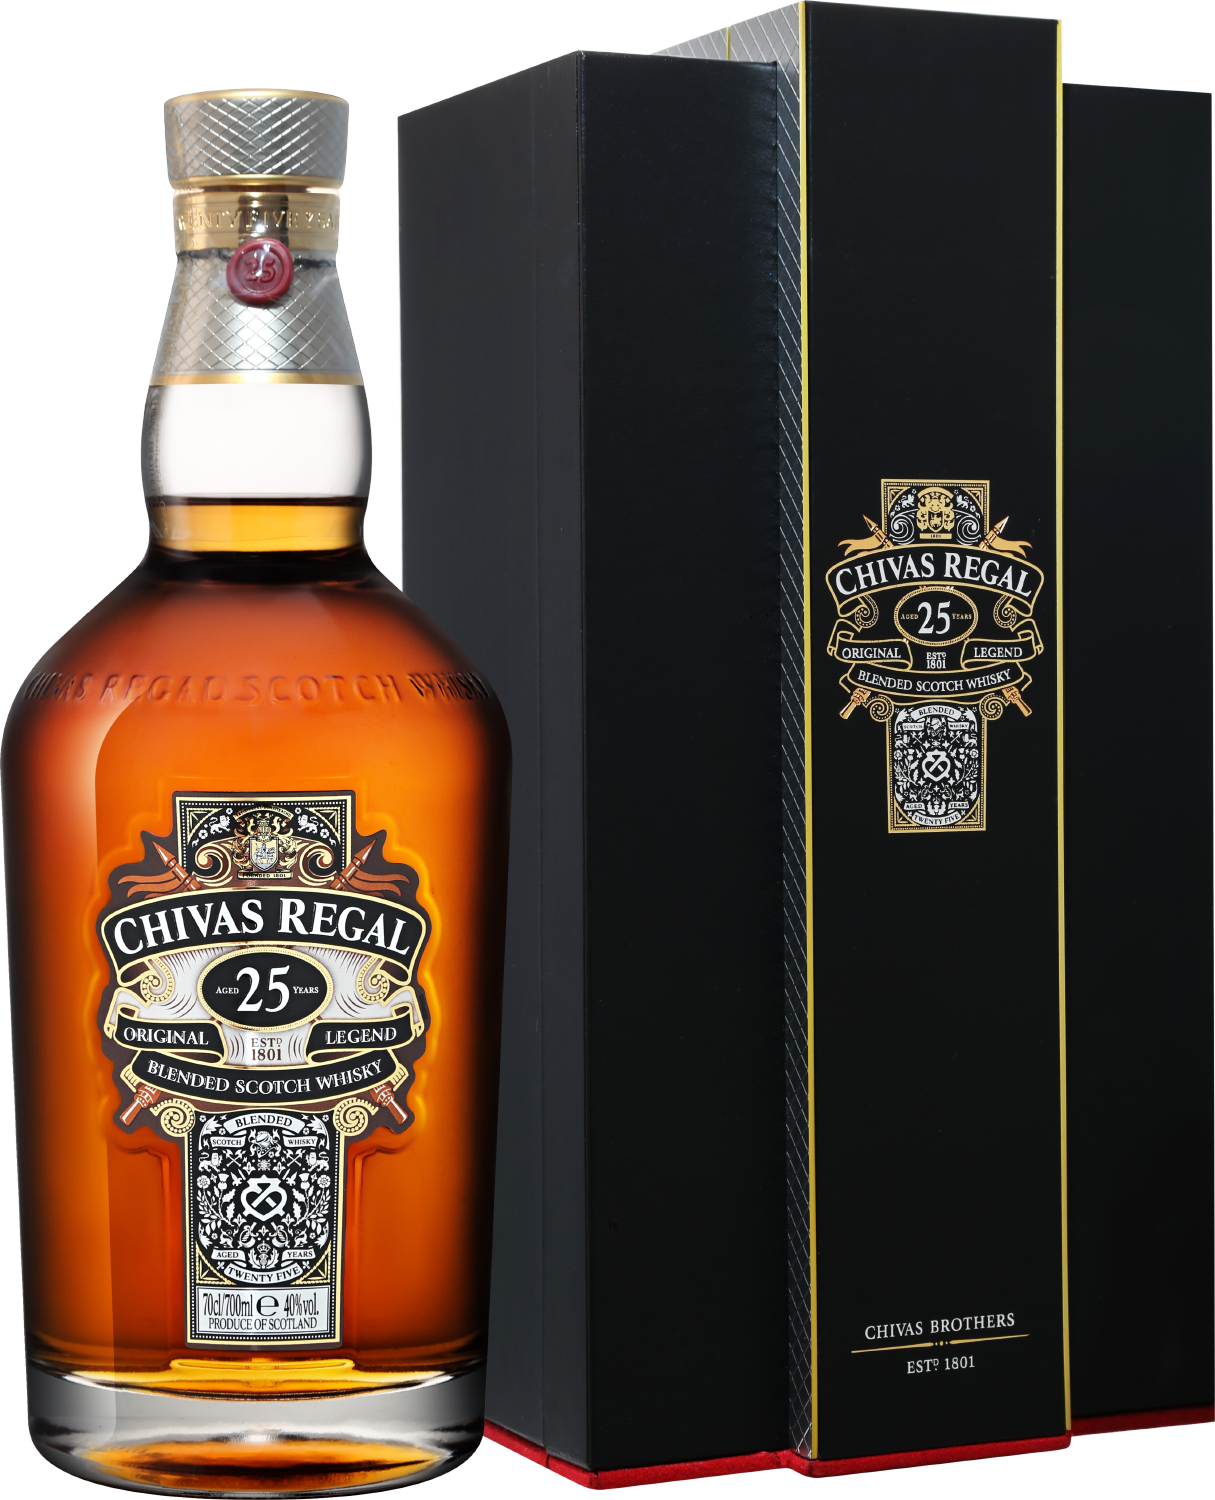 Chivas Regal Blended Scotch Whisky 25 y.o. (gift box) chivas regal extra oloroso sherry cask blended scotch whisky gift box